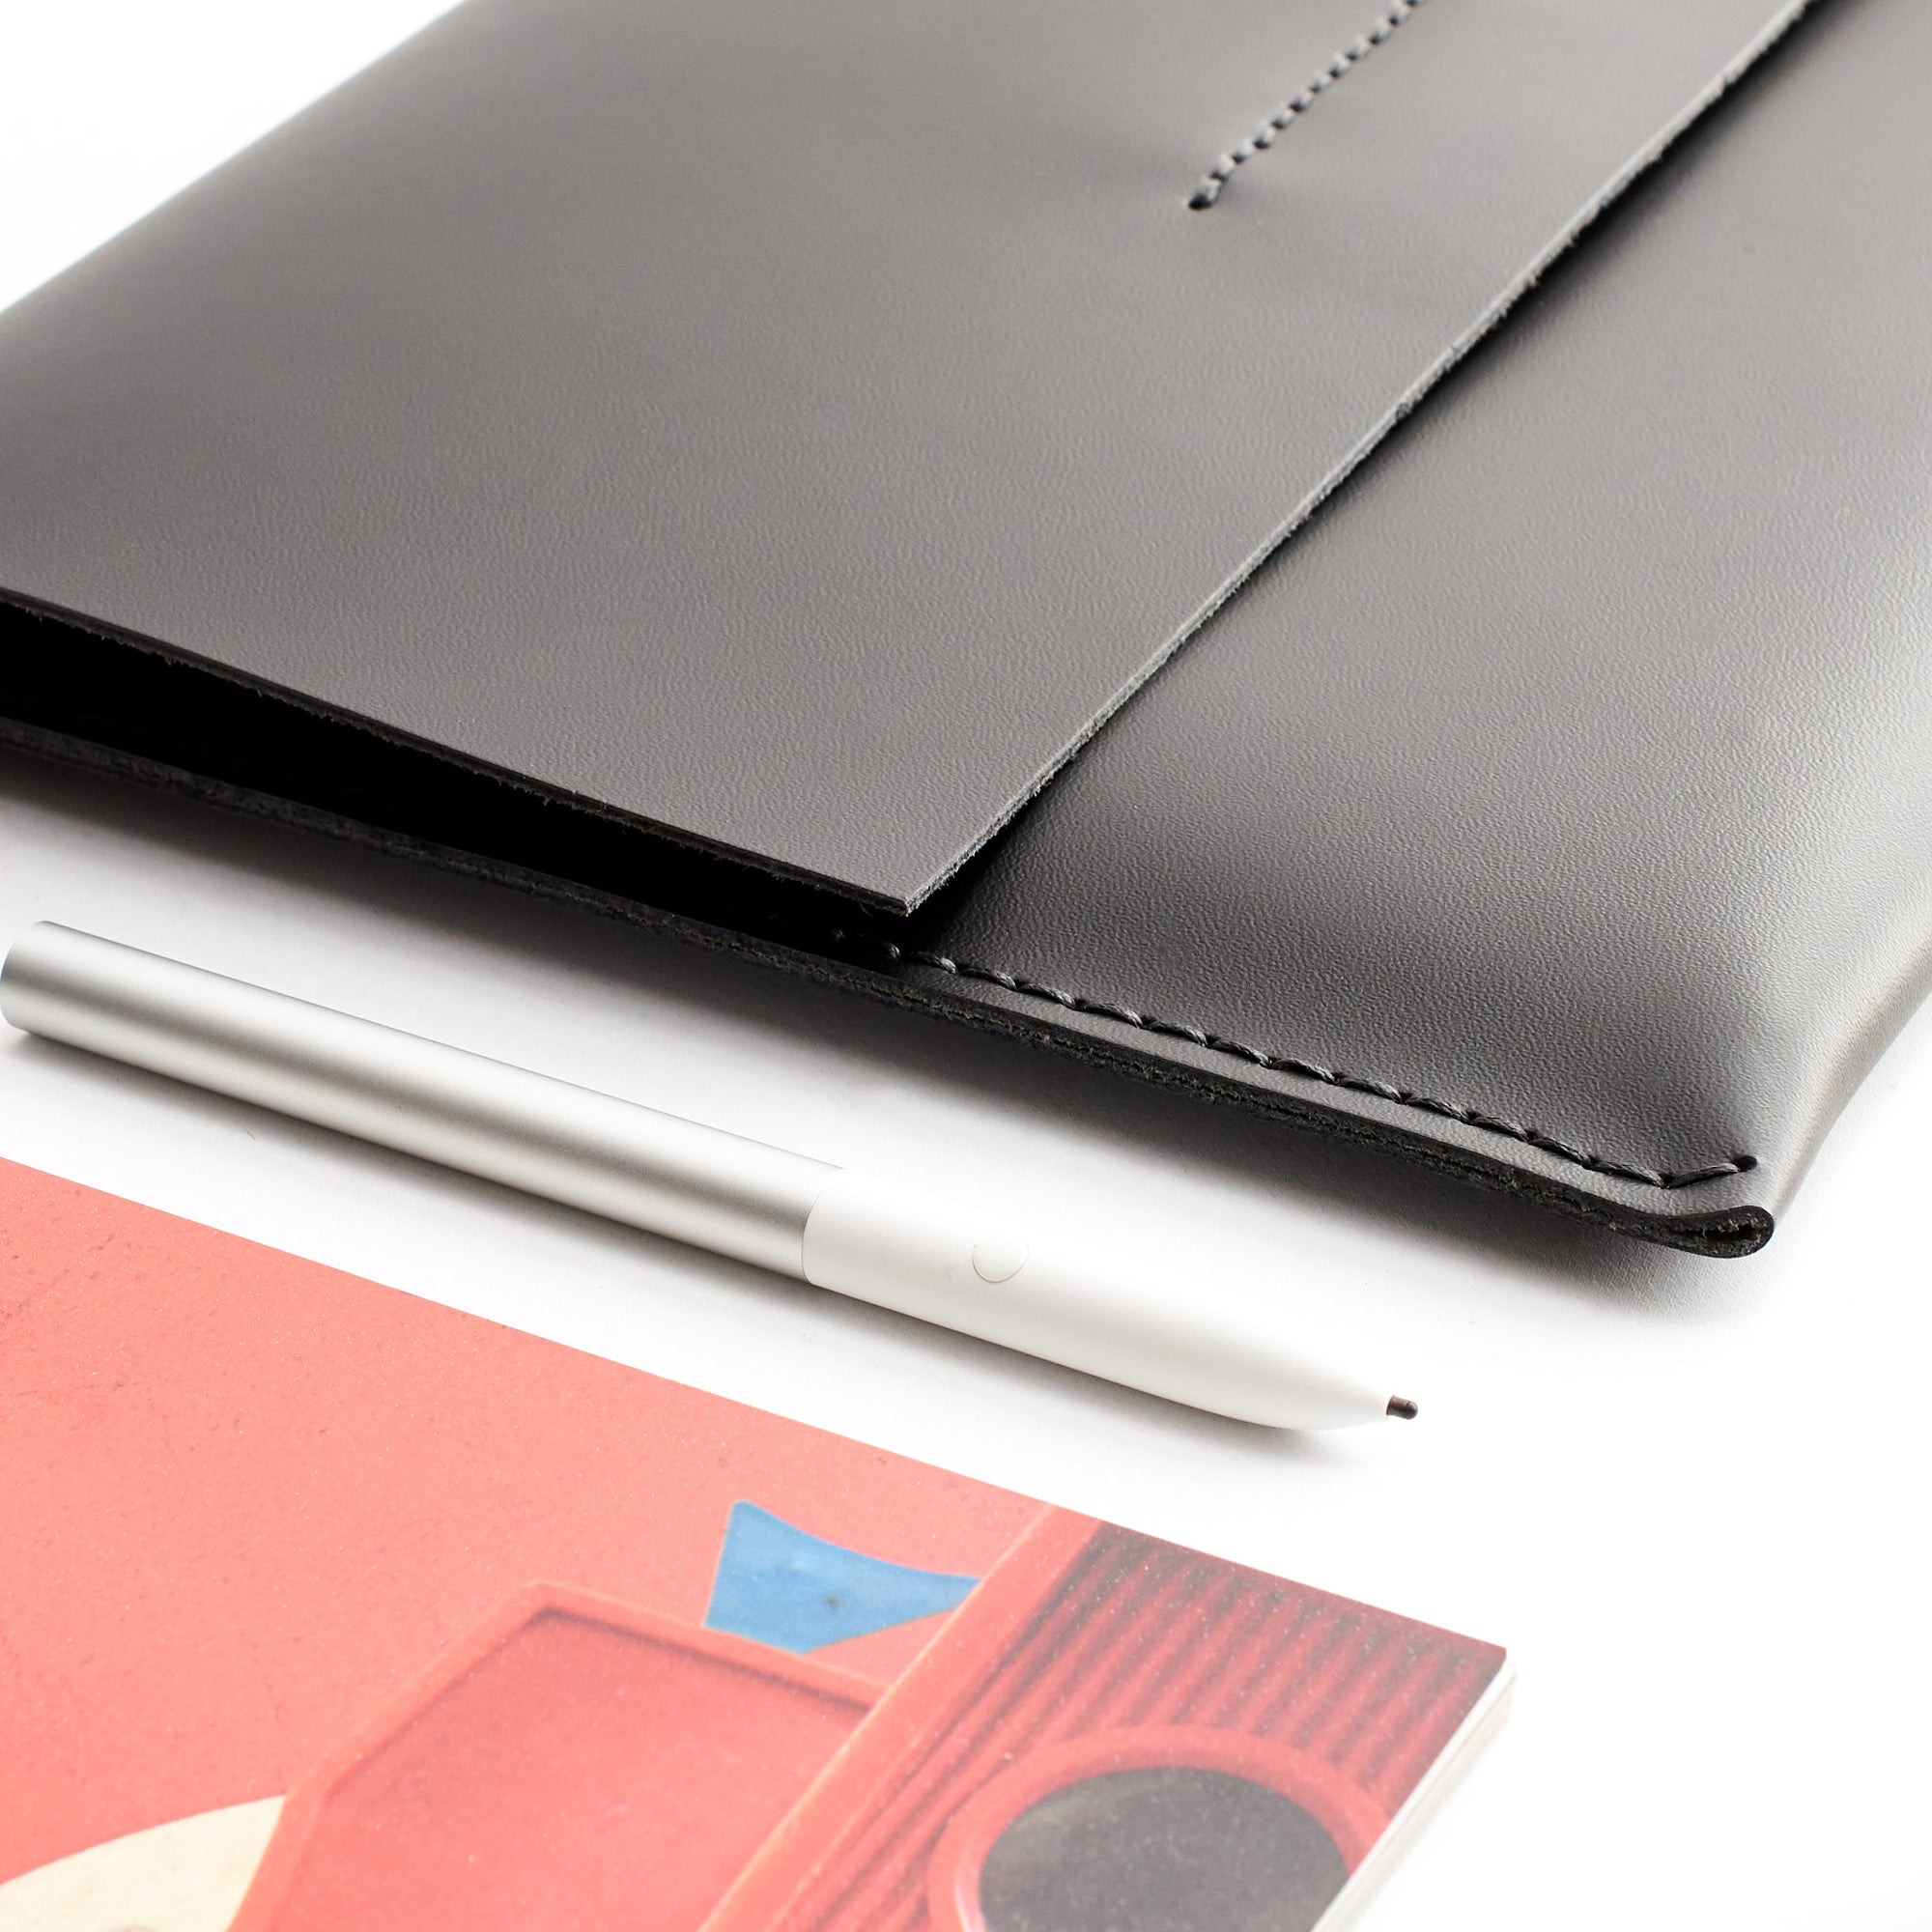 Style. black leather. ASUS Zenbook Pro Duo Black leather case with pen holder. ASUS laptop mens folio